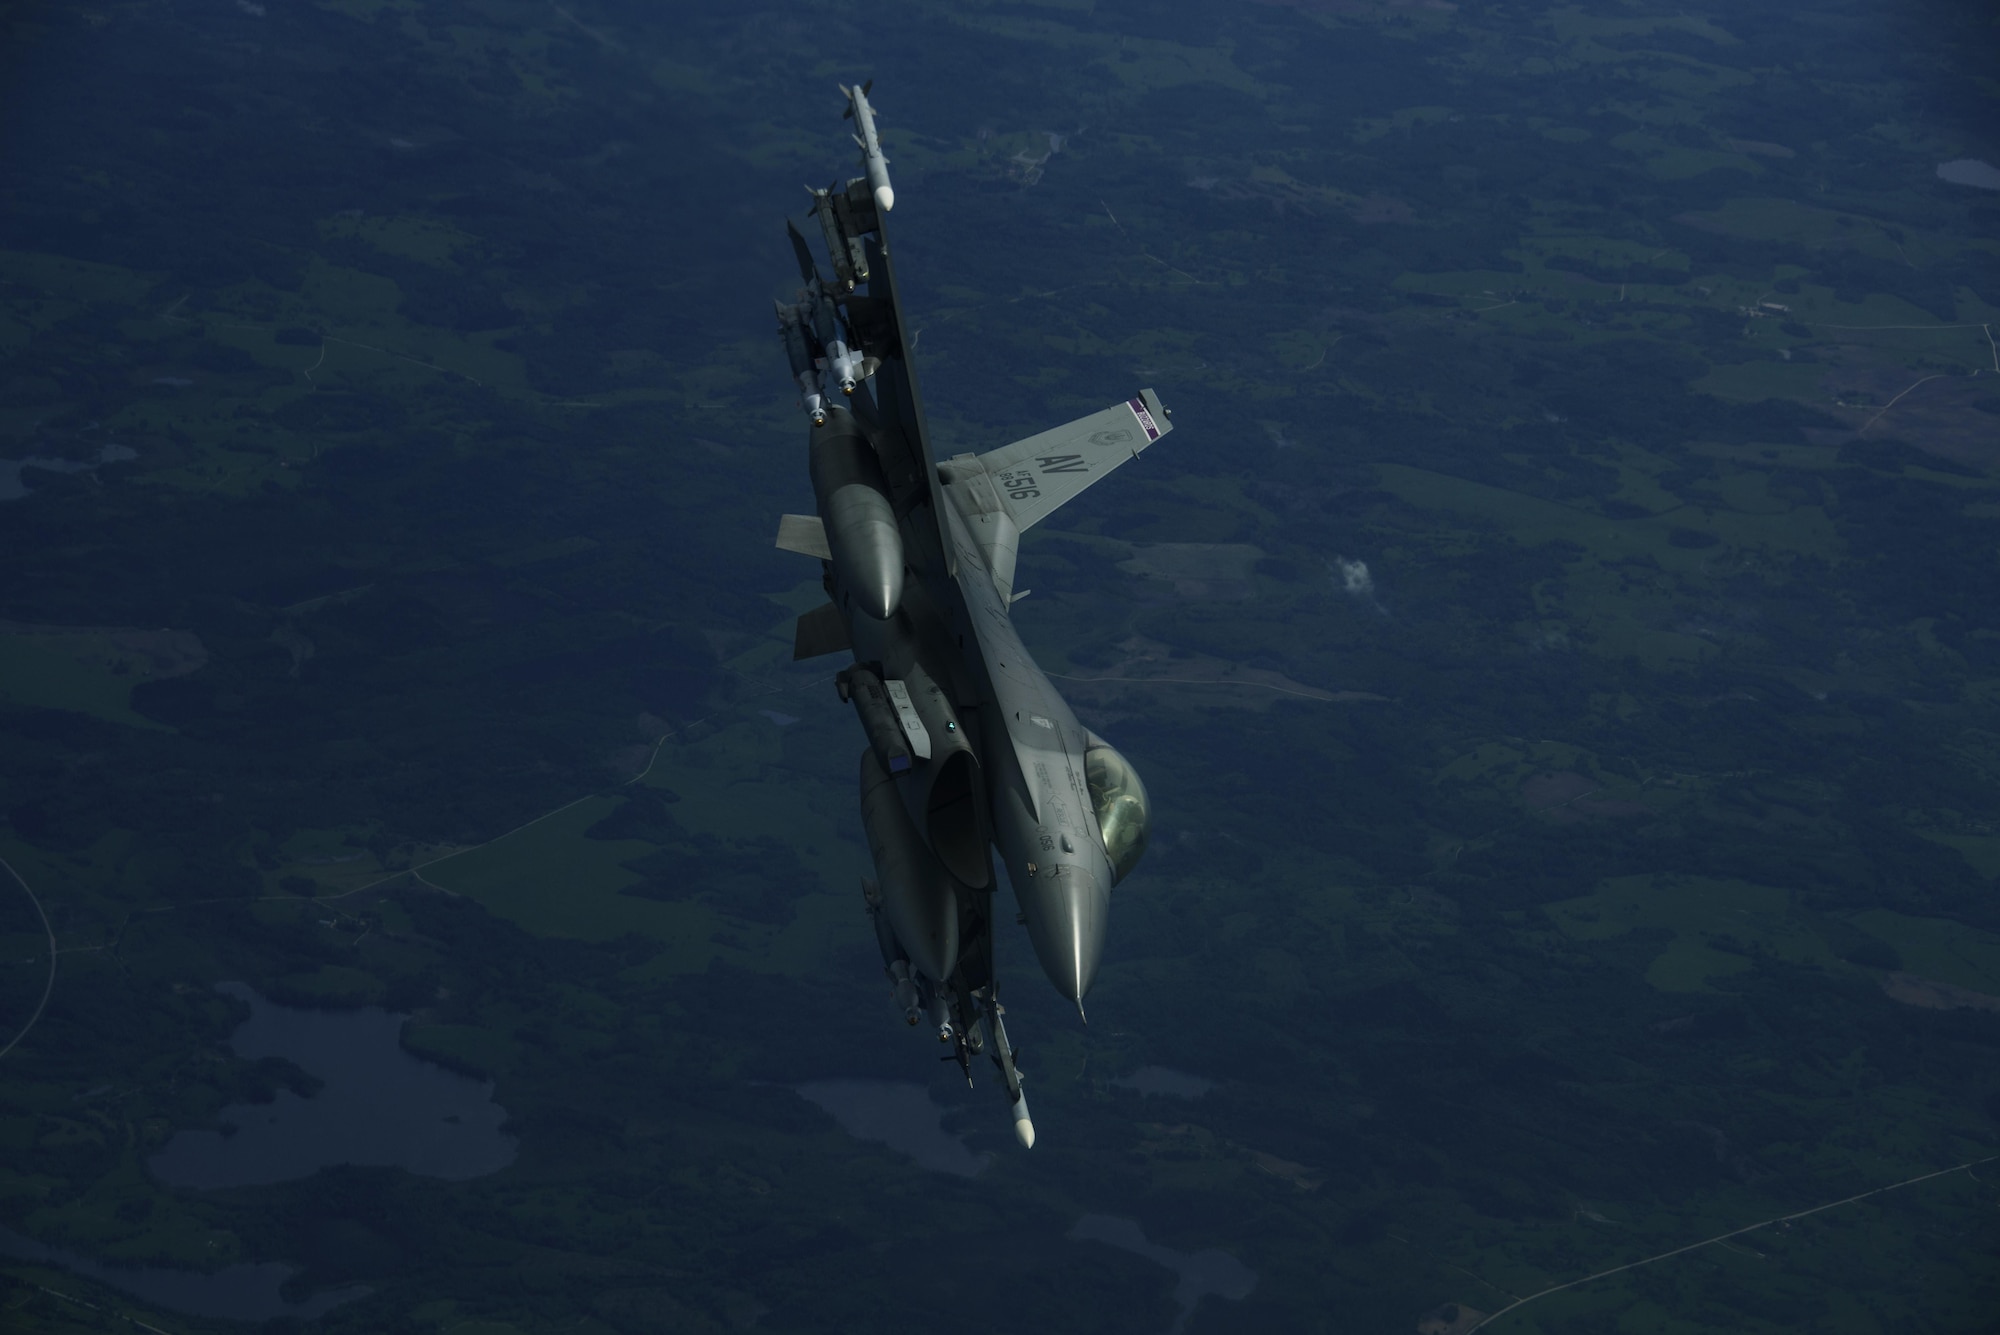 An F-16 Fighting Falcon, 510th Fighter Squadron, is deployed to Krzesiny Air Base, Poland, in support of Aviation
Detachment rotation 17-3, exercise BALTOPS and exercise Saber Strike flies over Latvia, June 7, 2017. The exercise, is designed to enhance flexibility and interoperability, to strengthen combined response capabilities, as well as demonstrate resolve among Allied and Partner Nations' forces to ensure stability in, and if necessary defend, the Baltic Sea region. (U.S. Air Force photo by Staff Sgt. Jonathan Snyder)